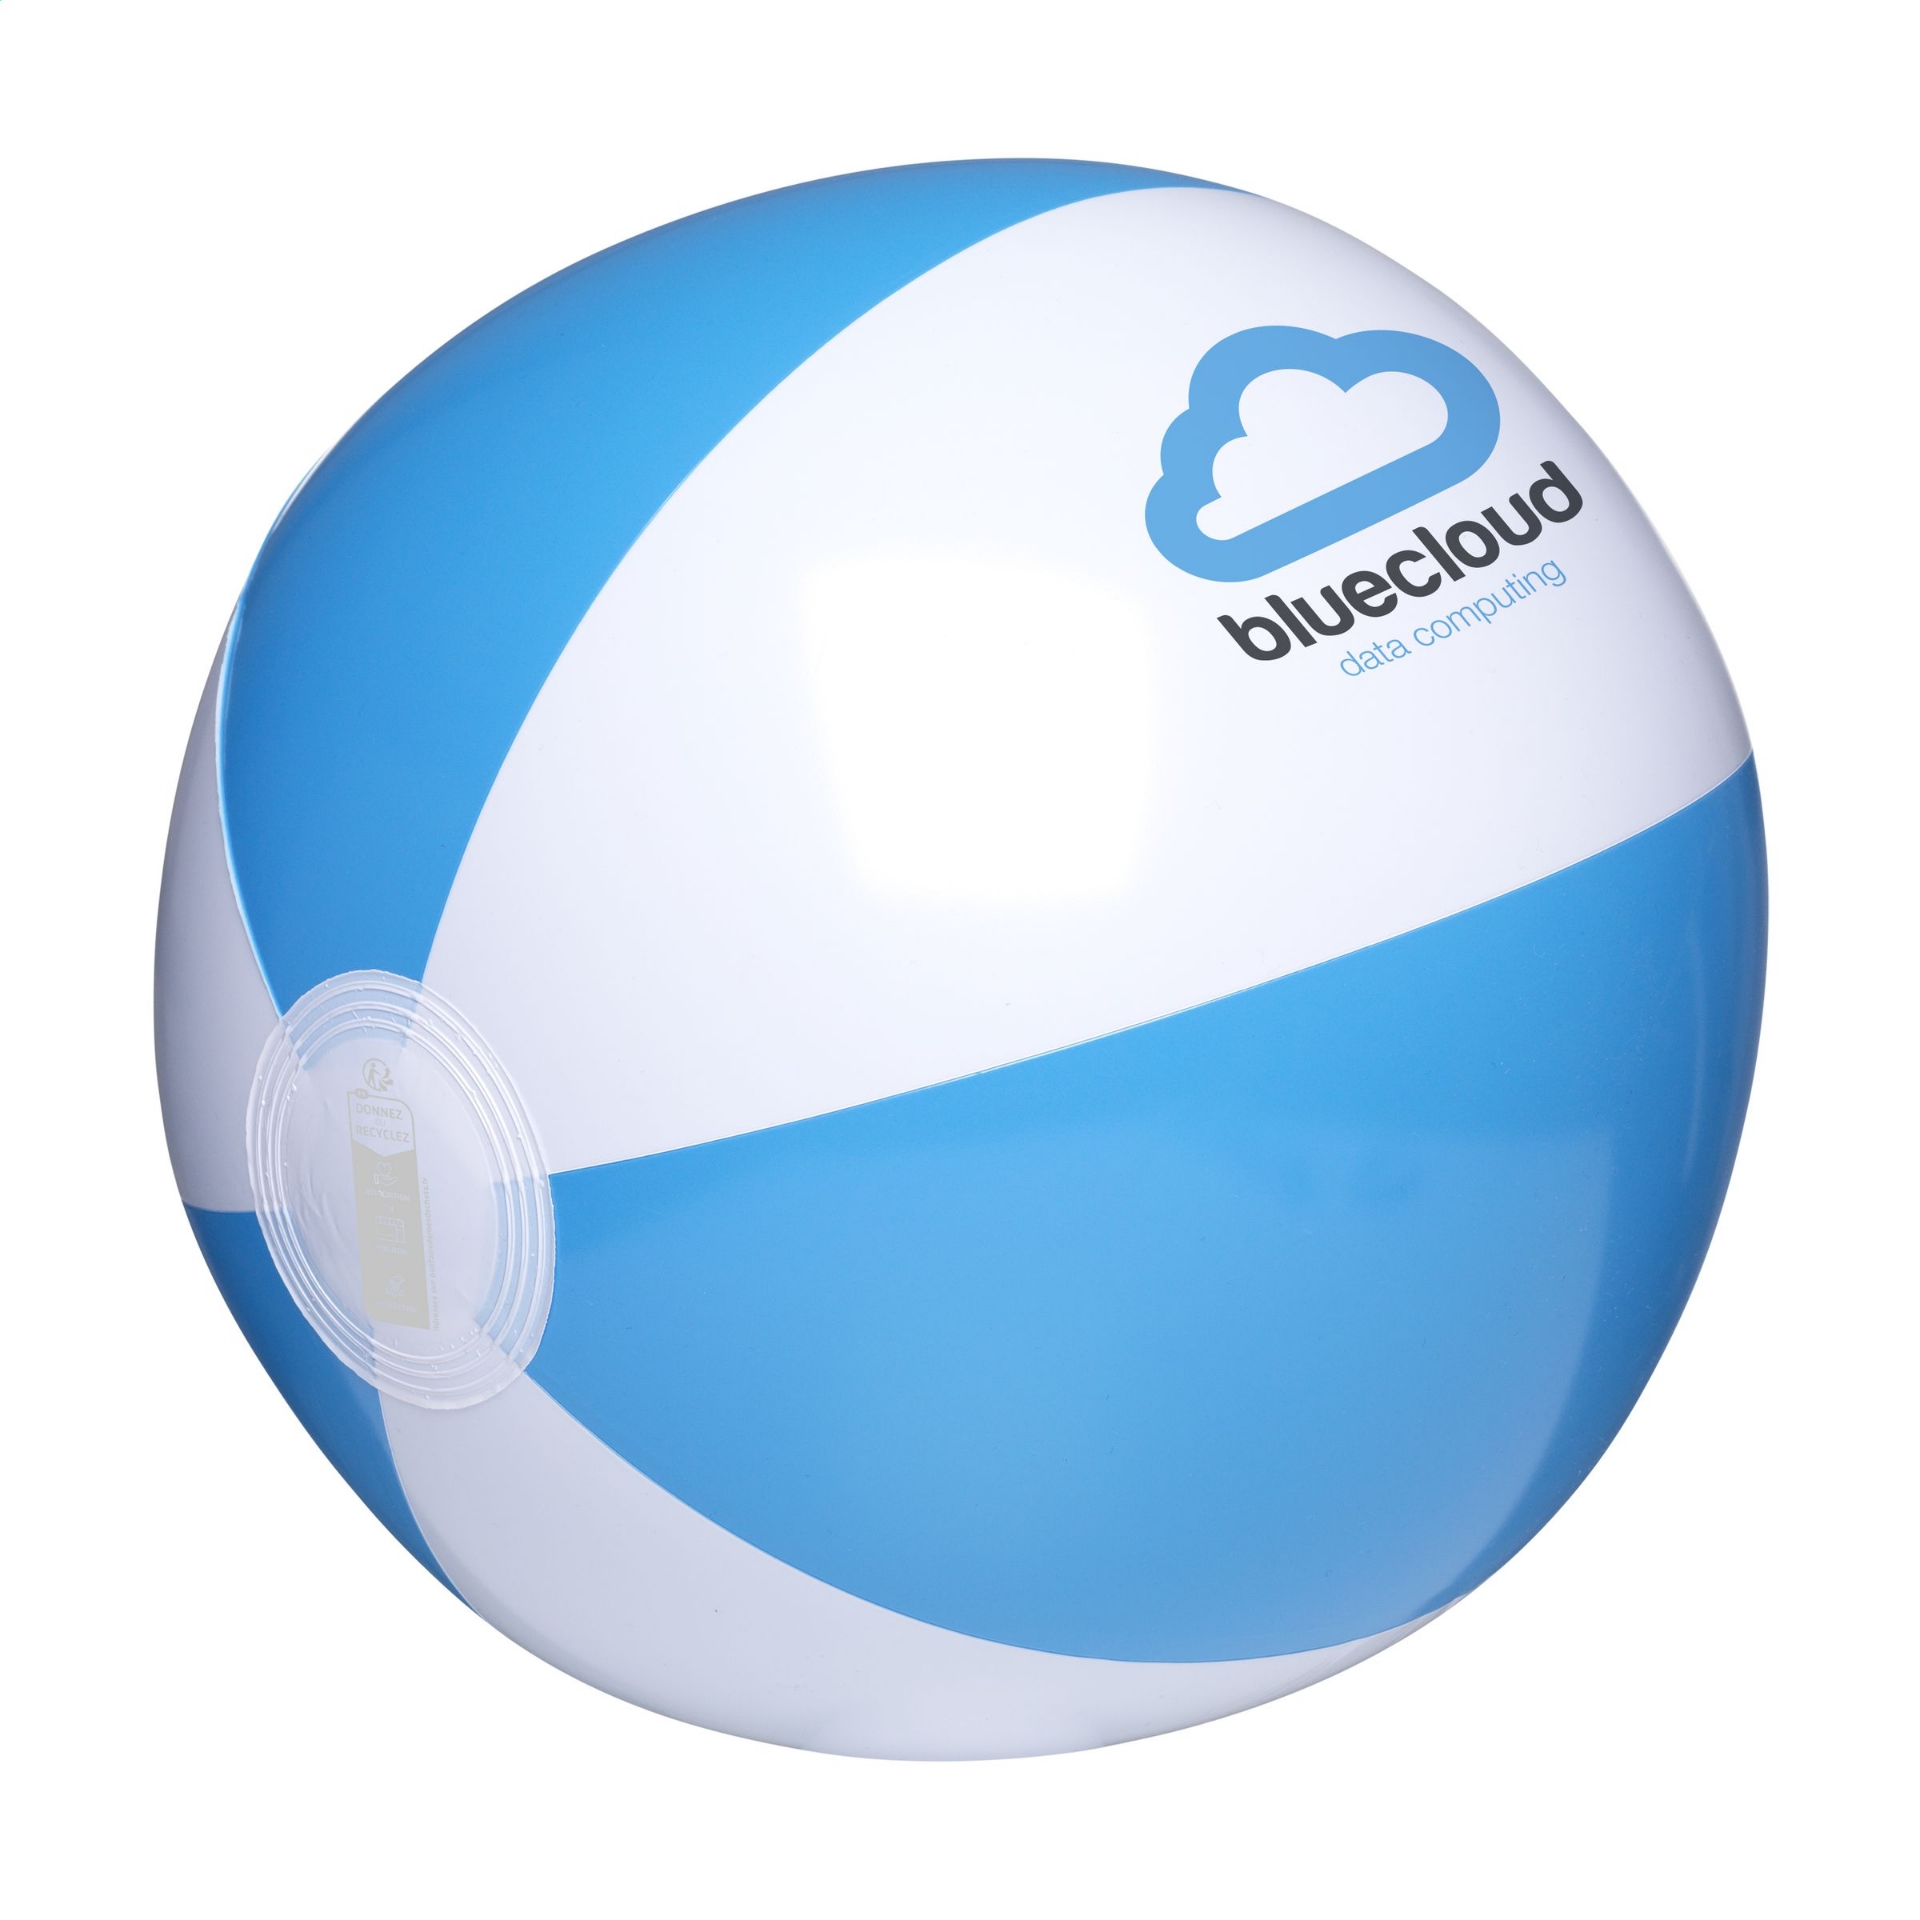 beach ball with white and blue panels